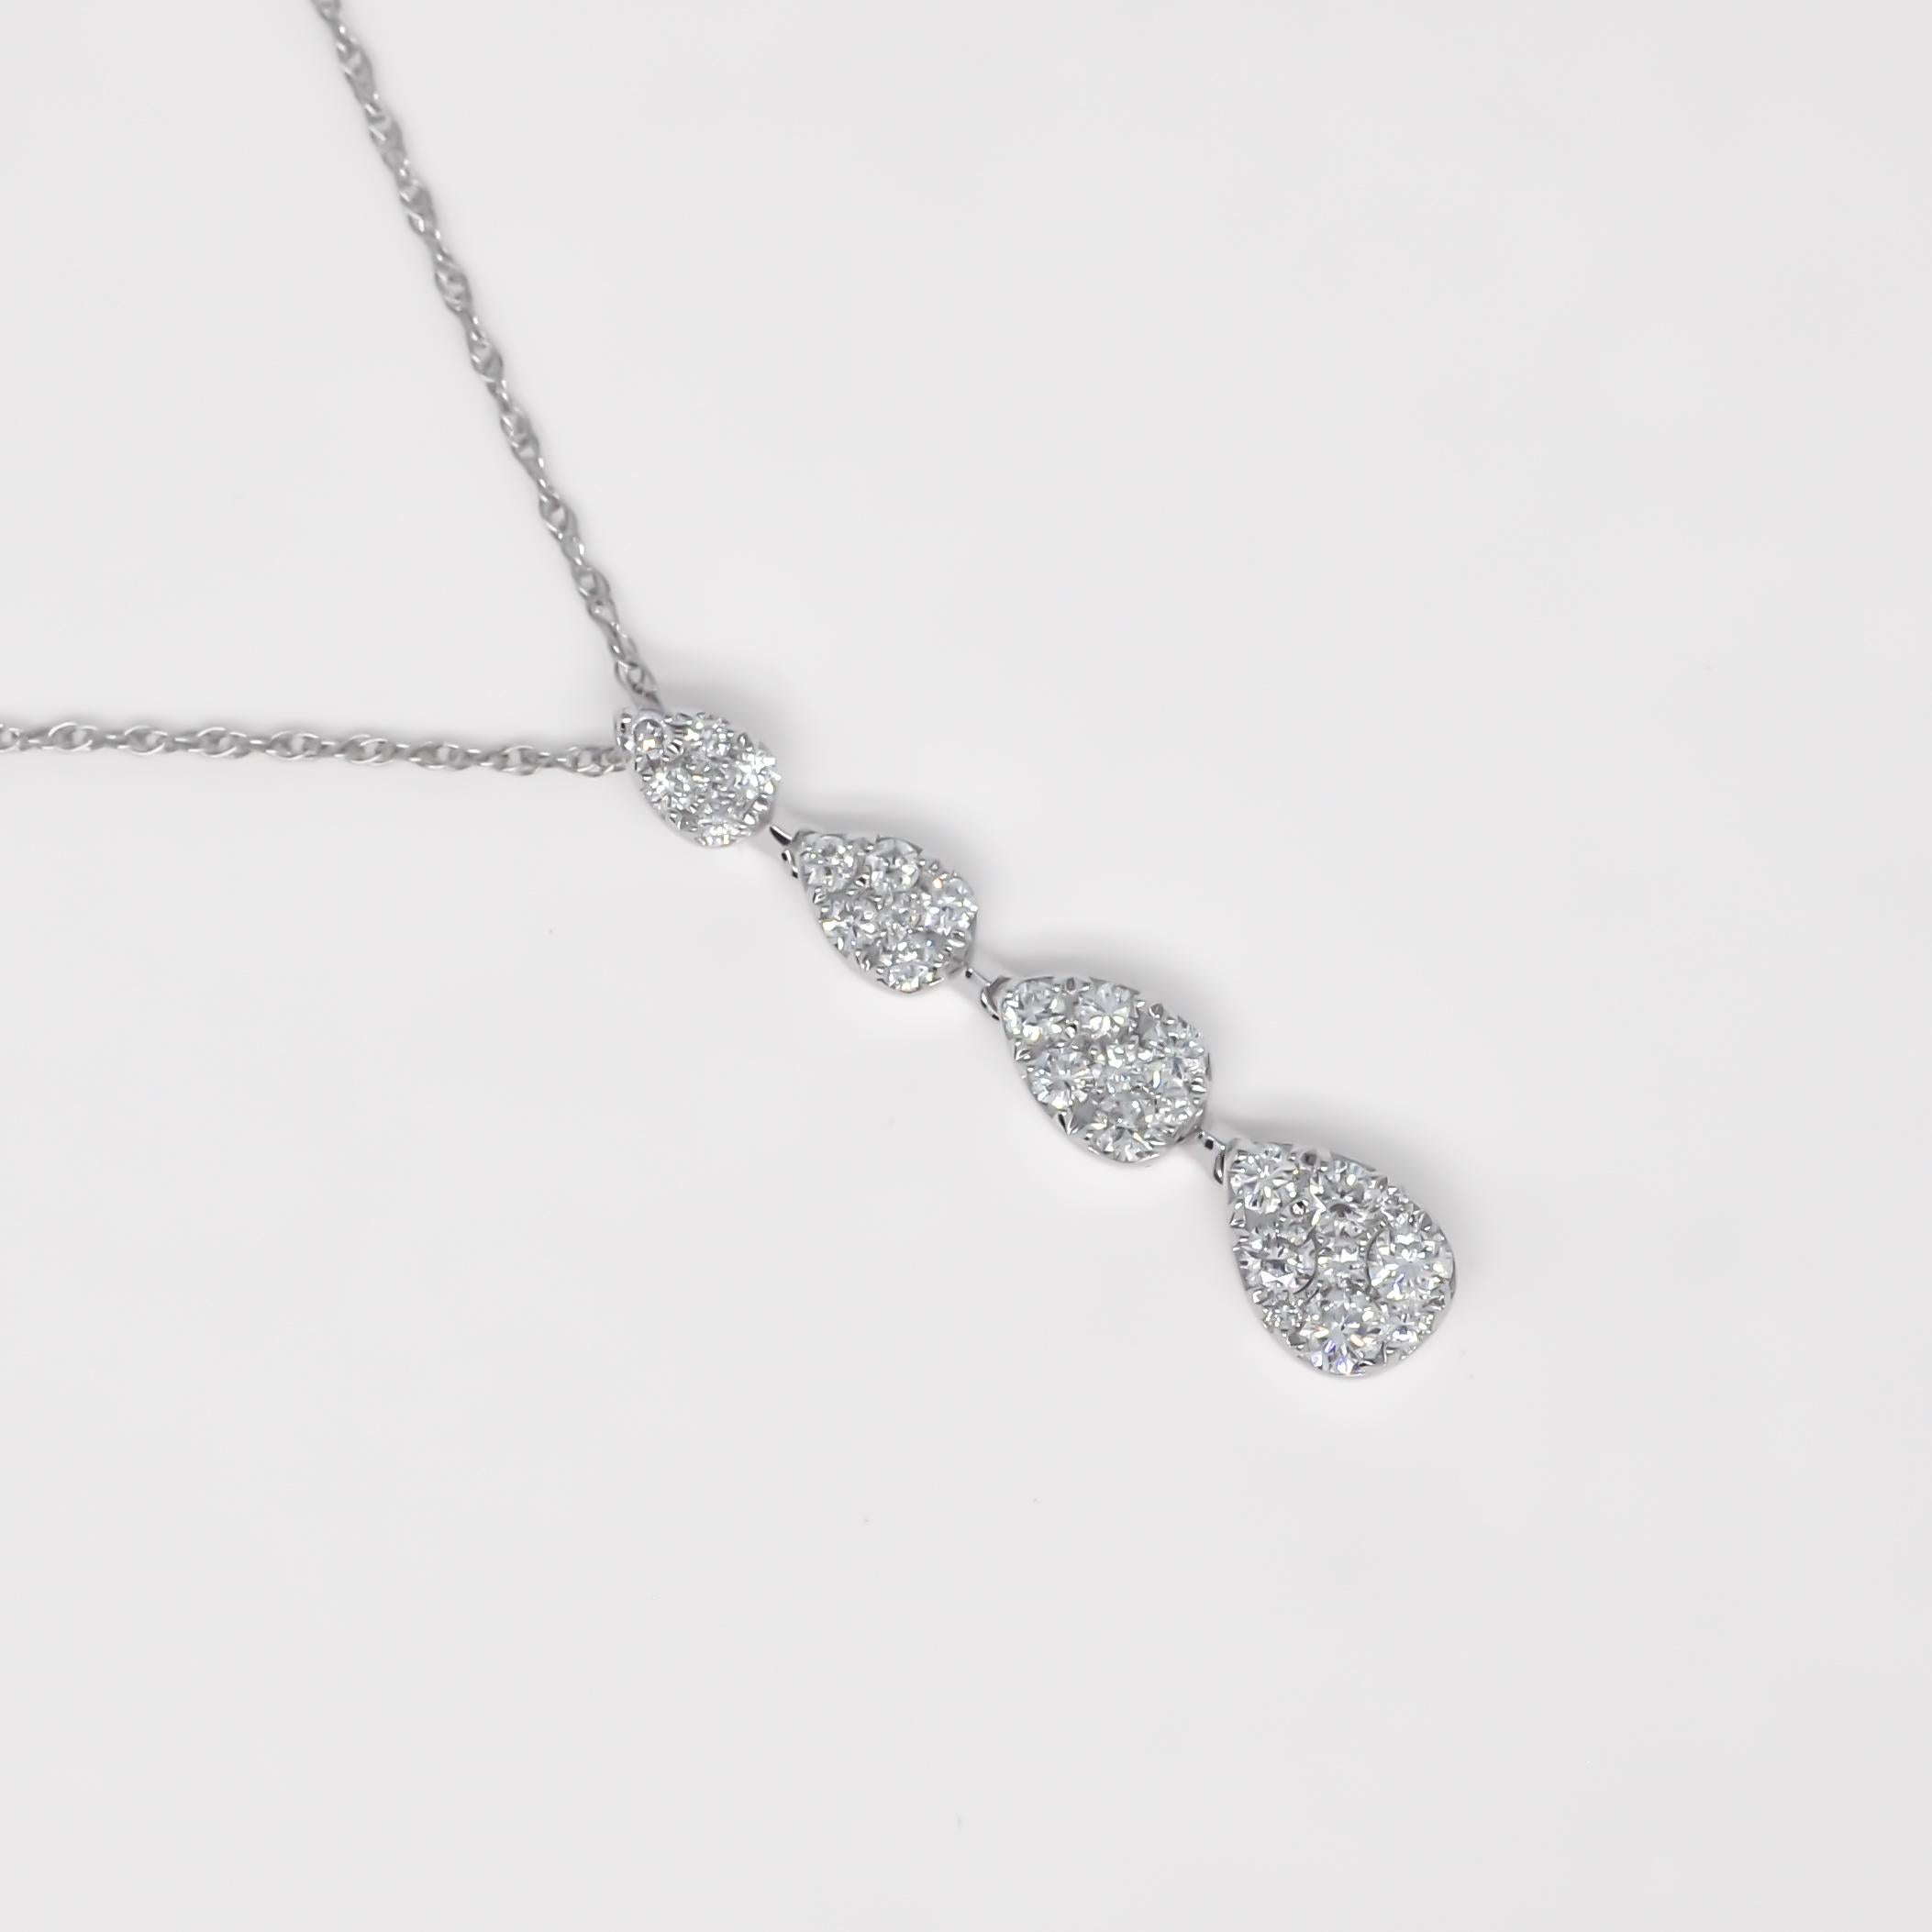 Behold the epitome of sophistication and charm with our Graduating Diamond Cluster Drop Pendant Necklace. This remarkable piece of jewelry showcases four clusters of natural round diamonds, each meticulously arranged to create a captivating and